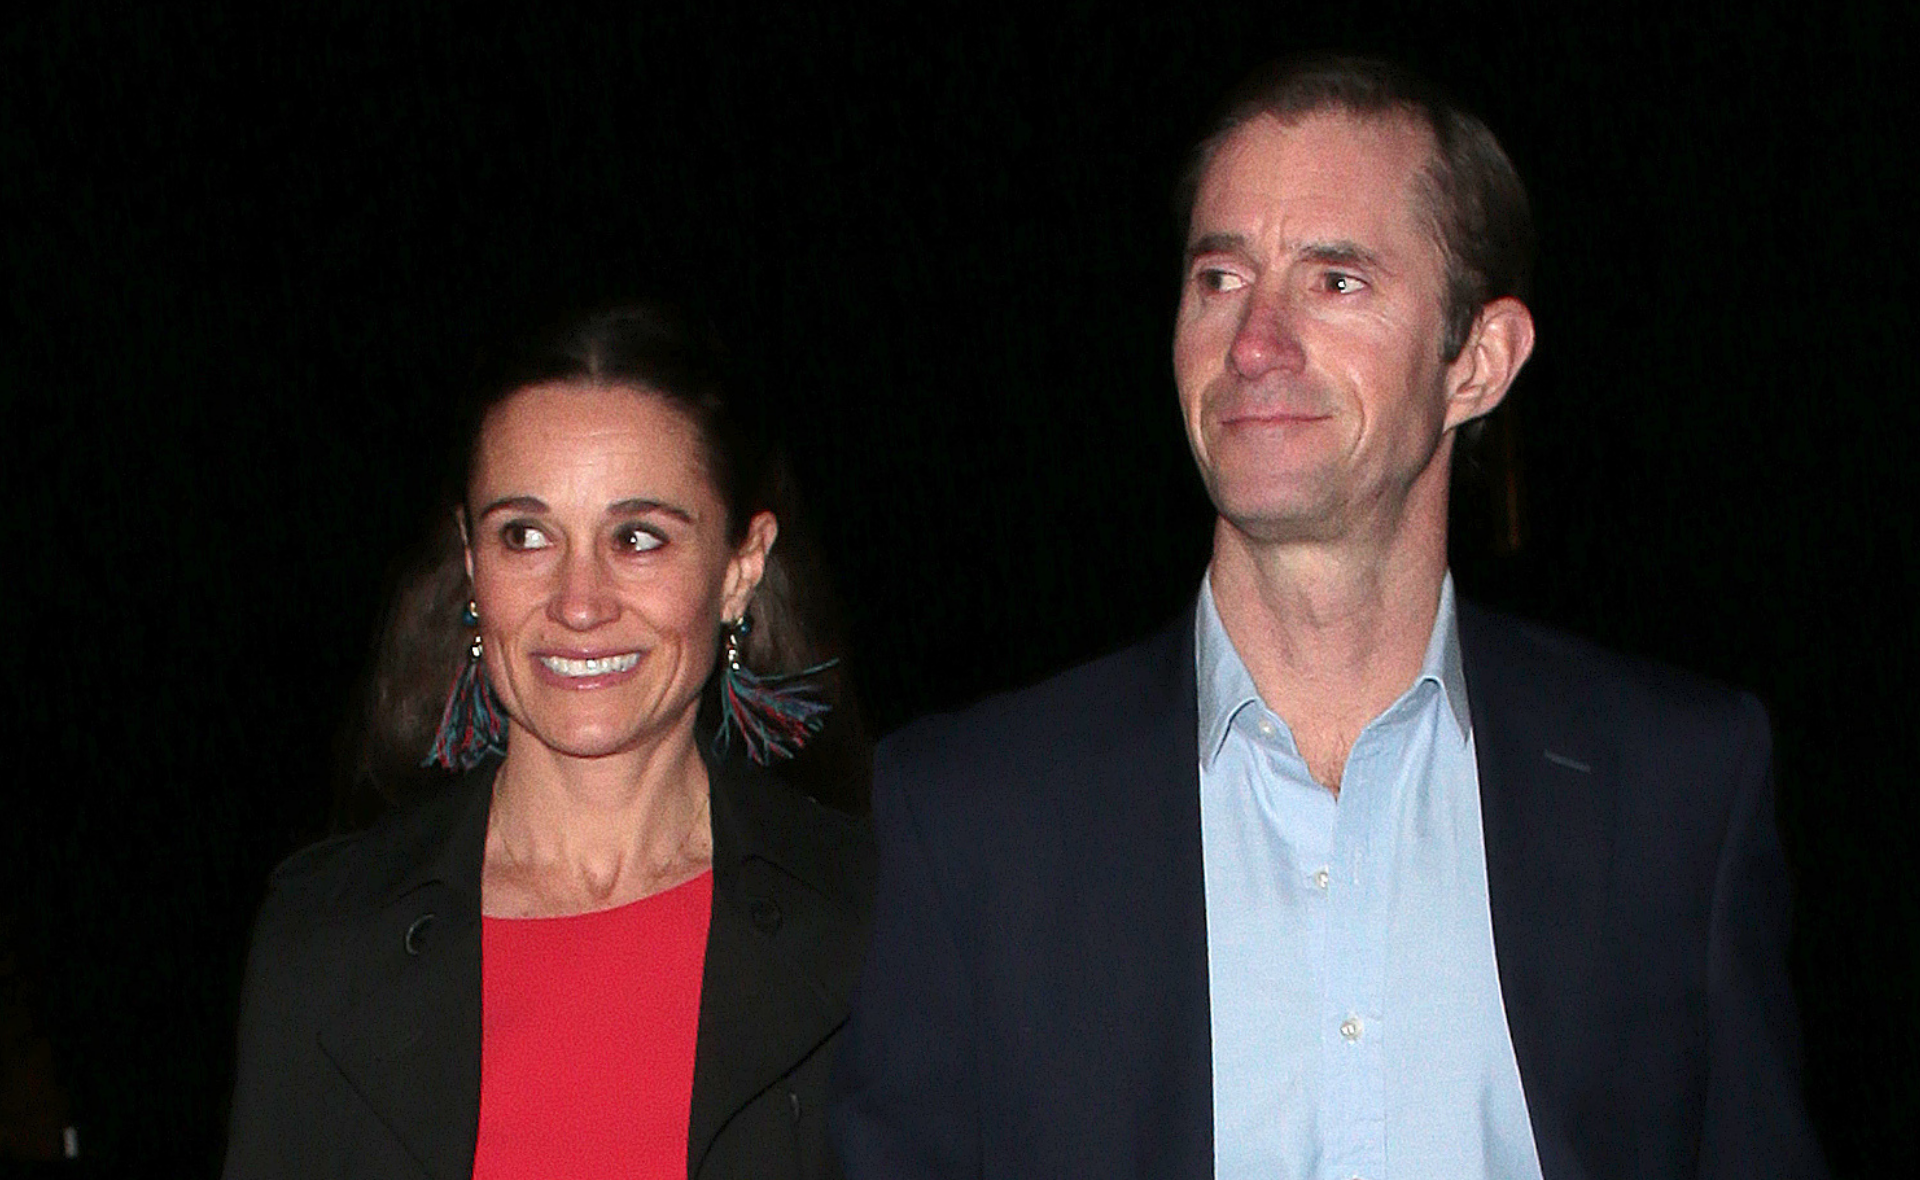 Pippa Middleton’s latest date night outfit has given us some much-needed fashion inspiration for Valentine’s Day